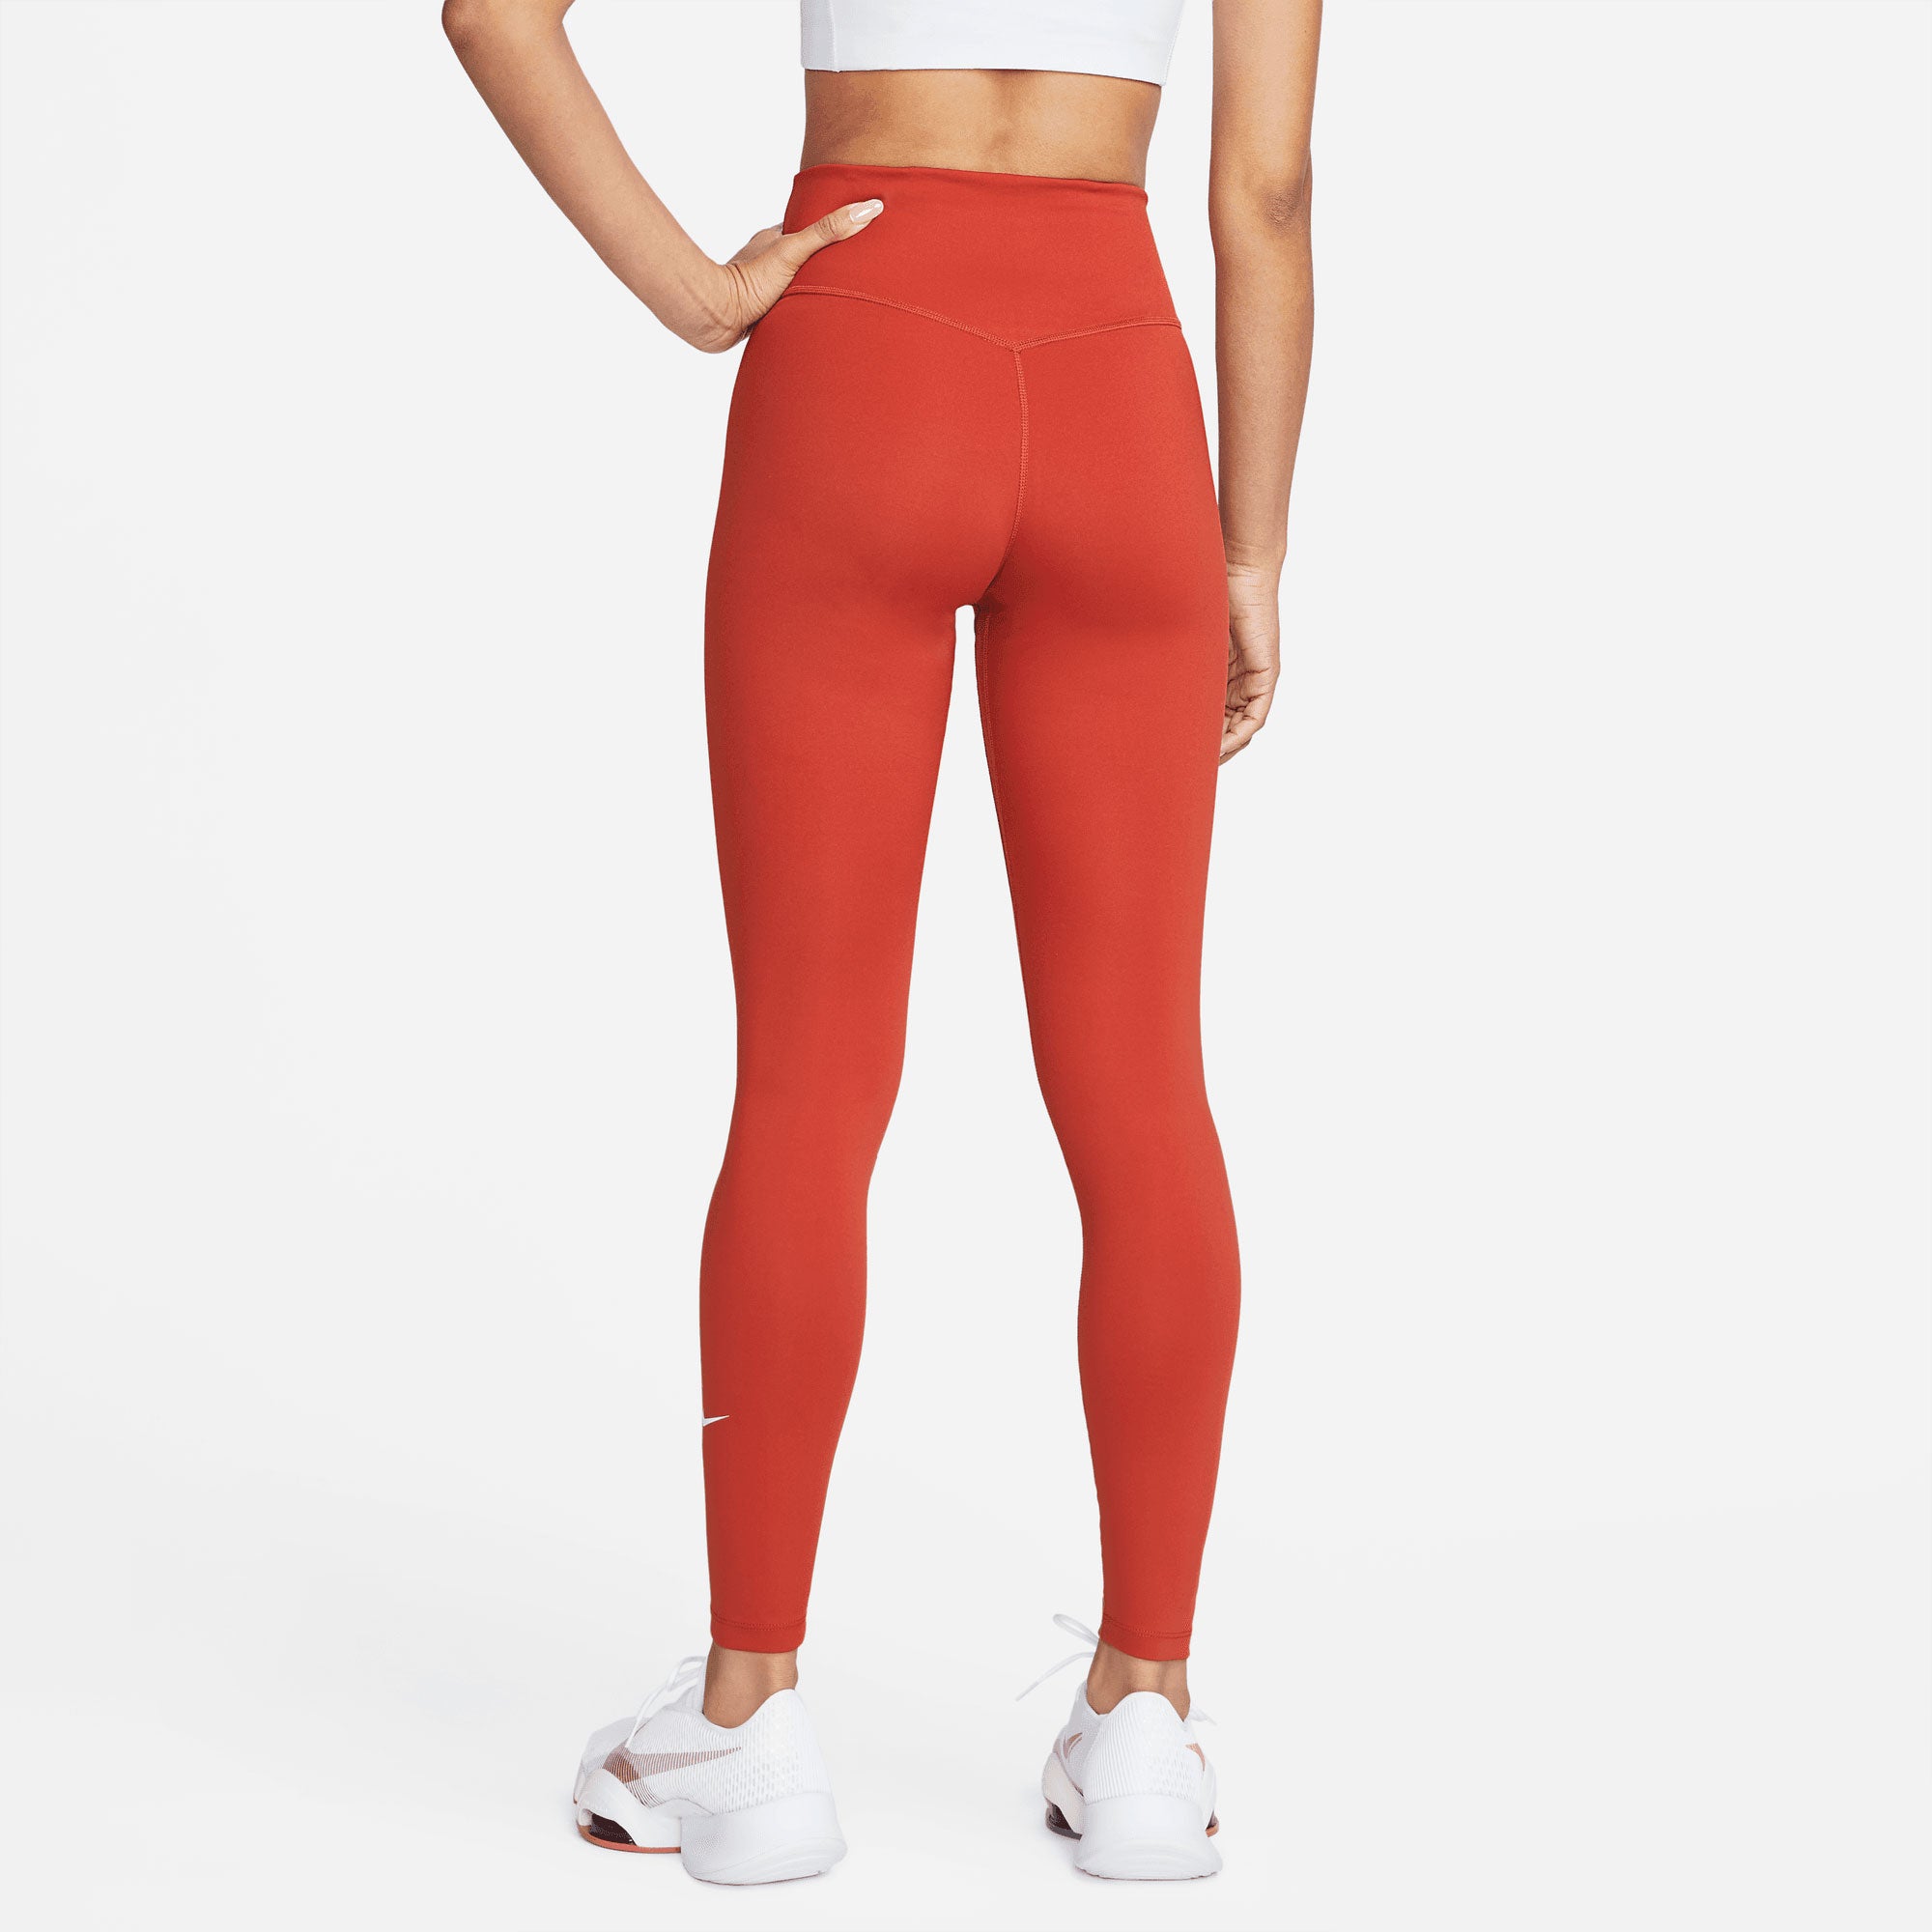 Nike One Dri-FIT Women's Mid-Rise Tights Red (2)